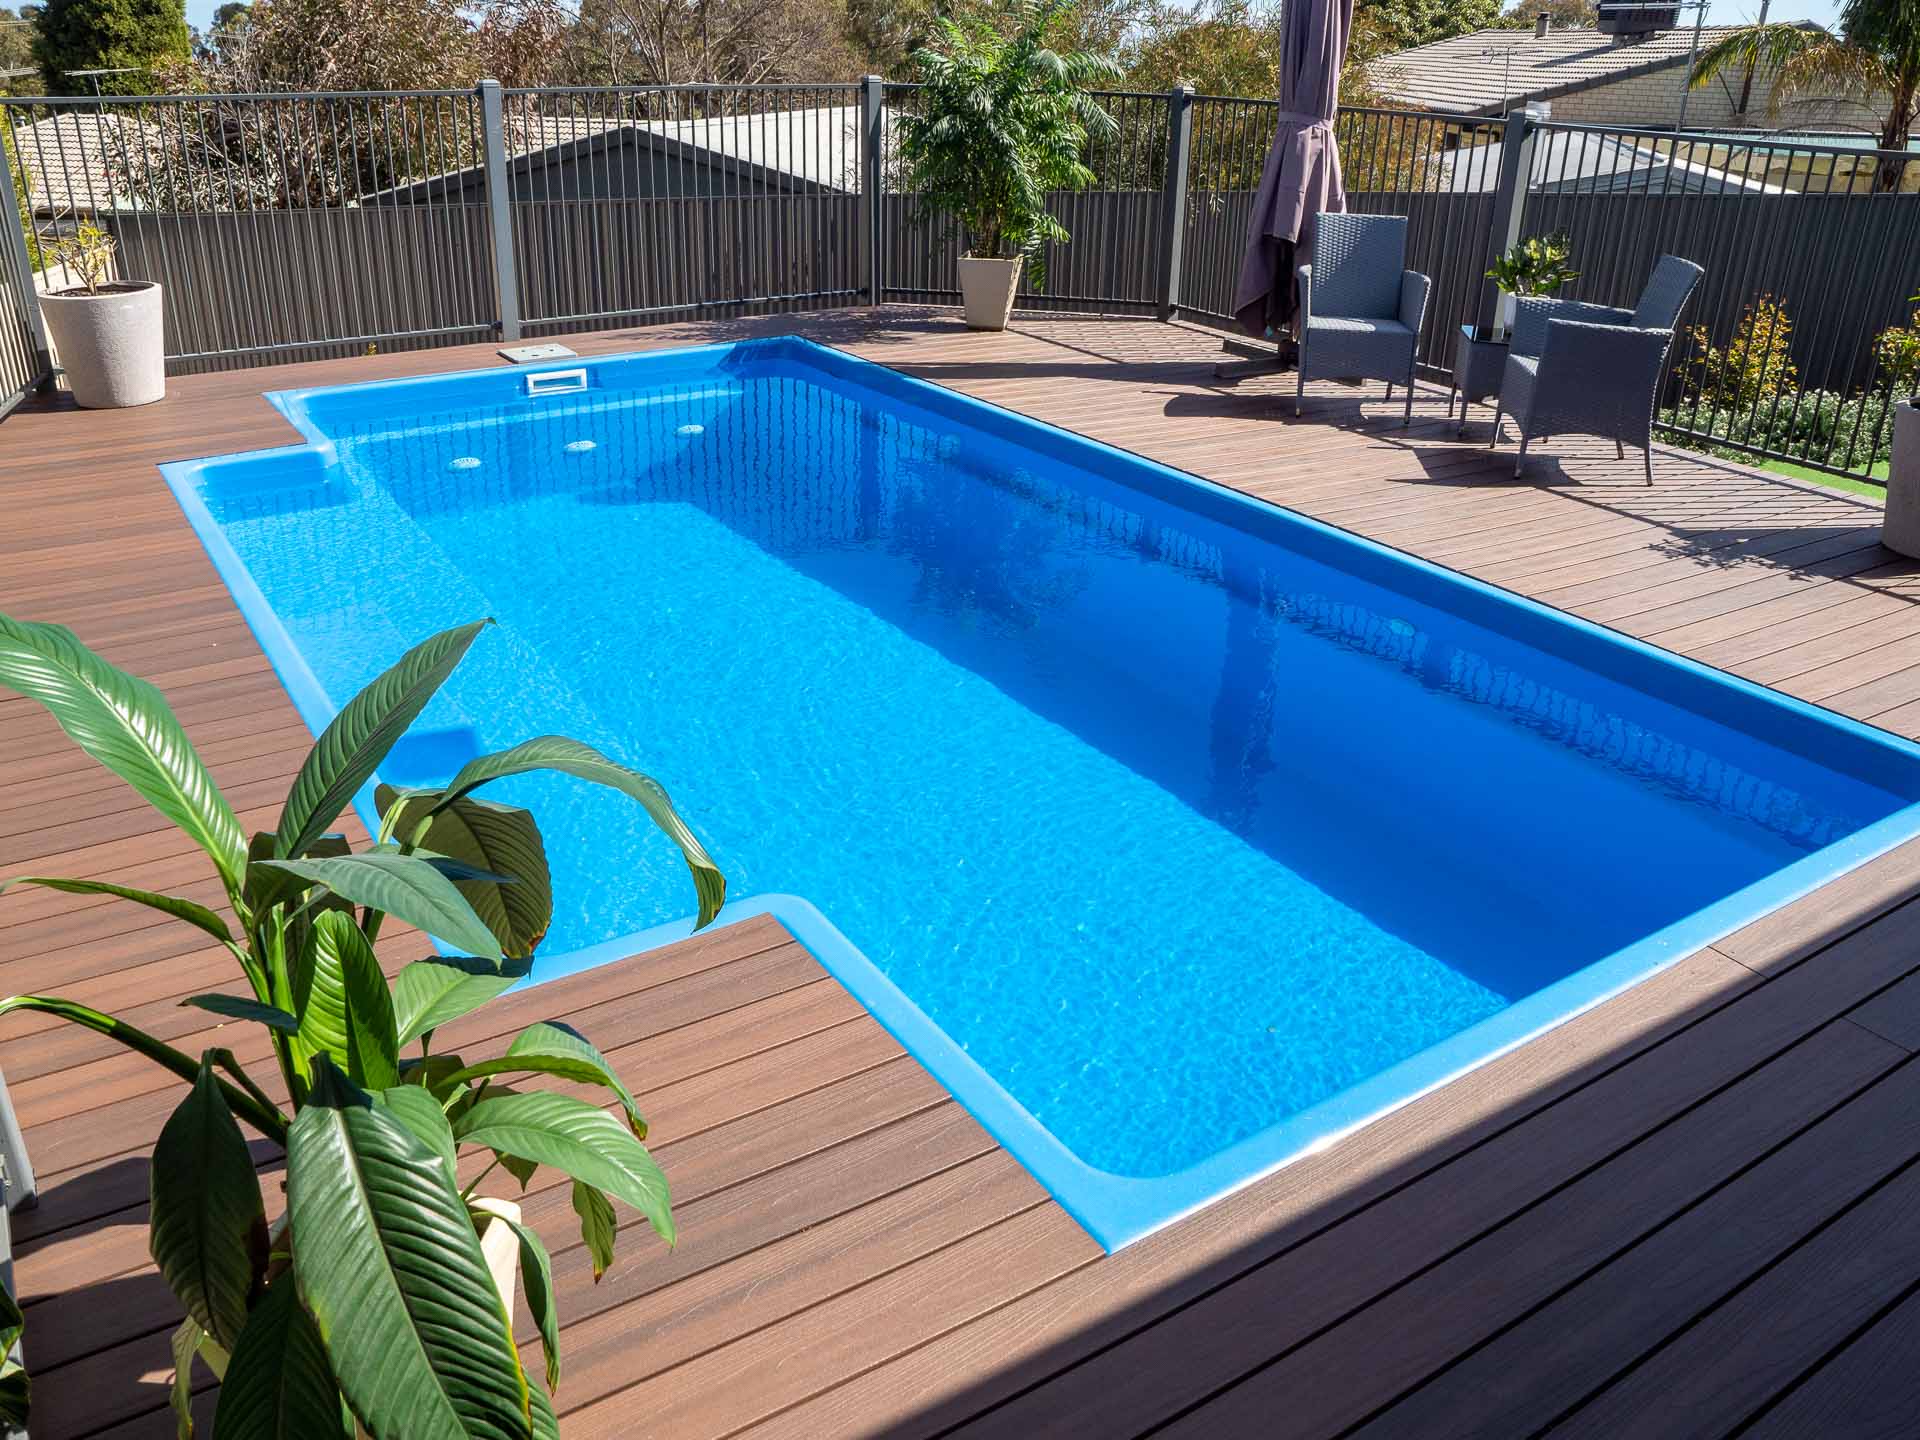 What are the benefits of an above ground pool?